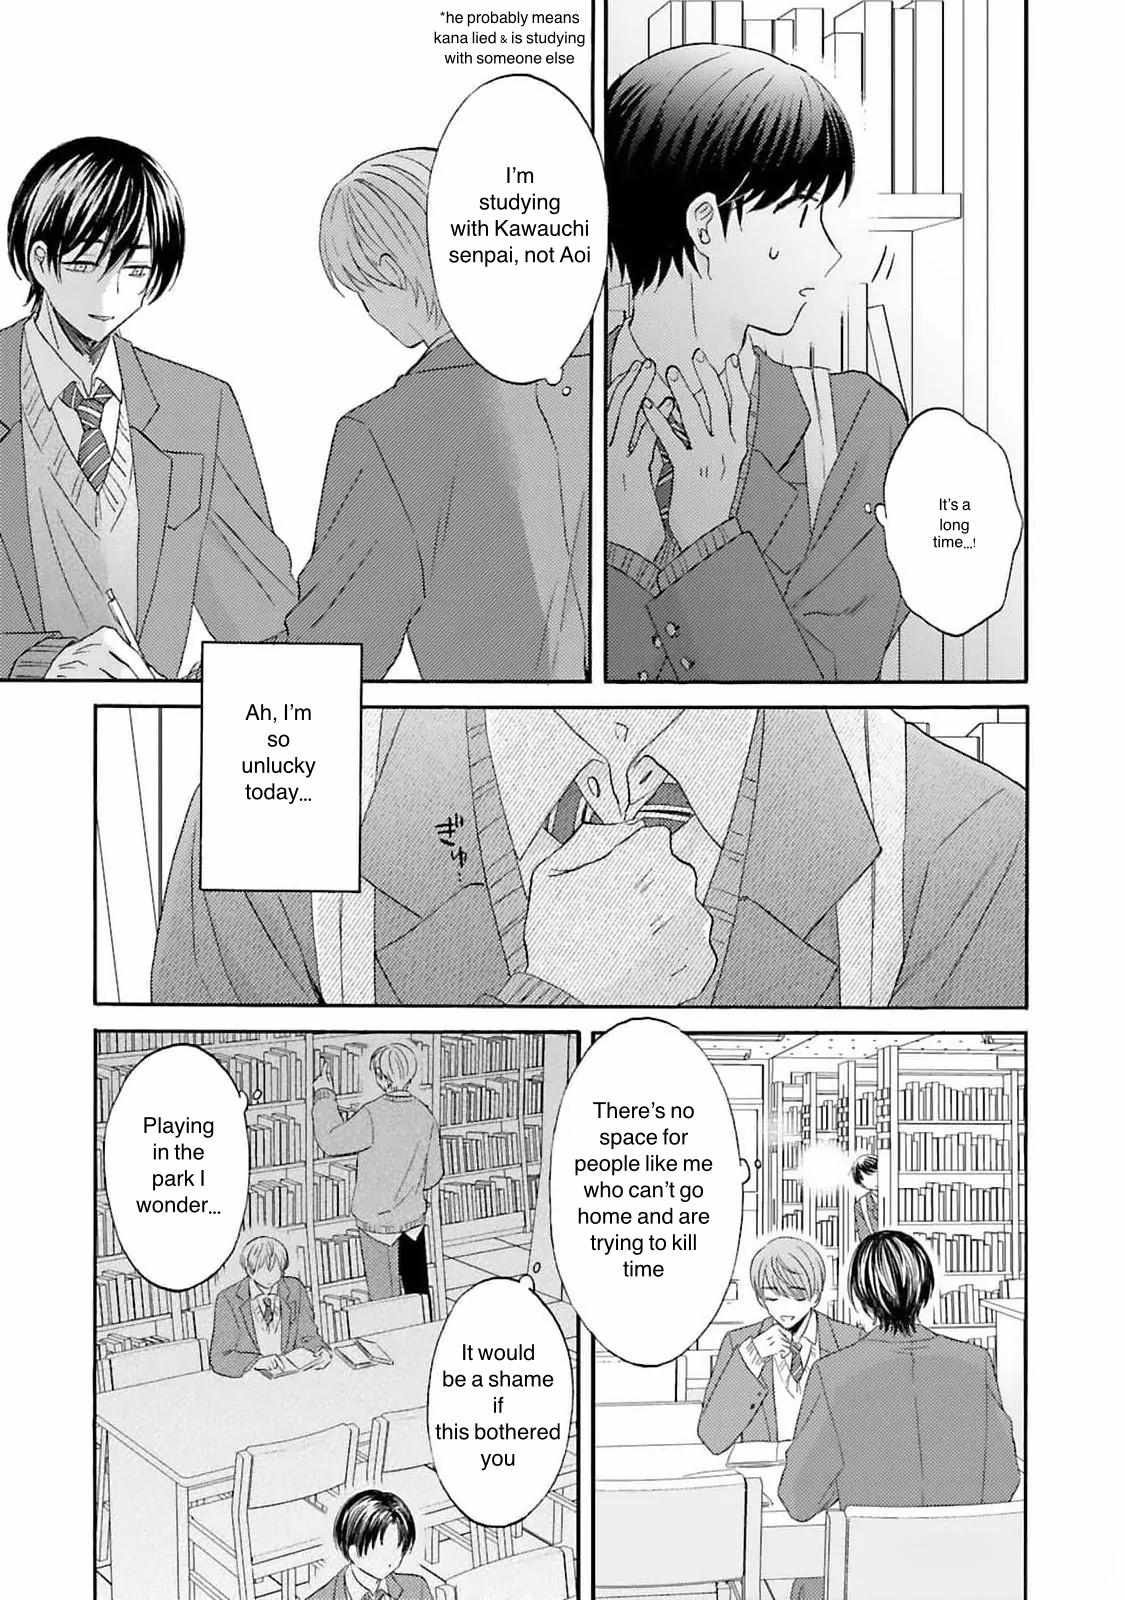 My Cutie Pie -An Ordinary Boy And His Gorgeous Childhood Friend- 〘Official〙 - 4 page 11-e87200b8